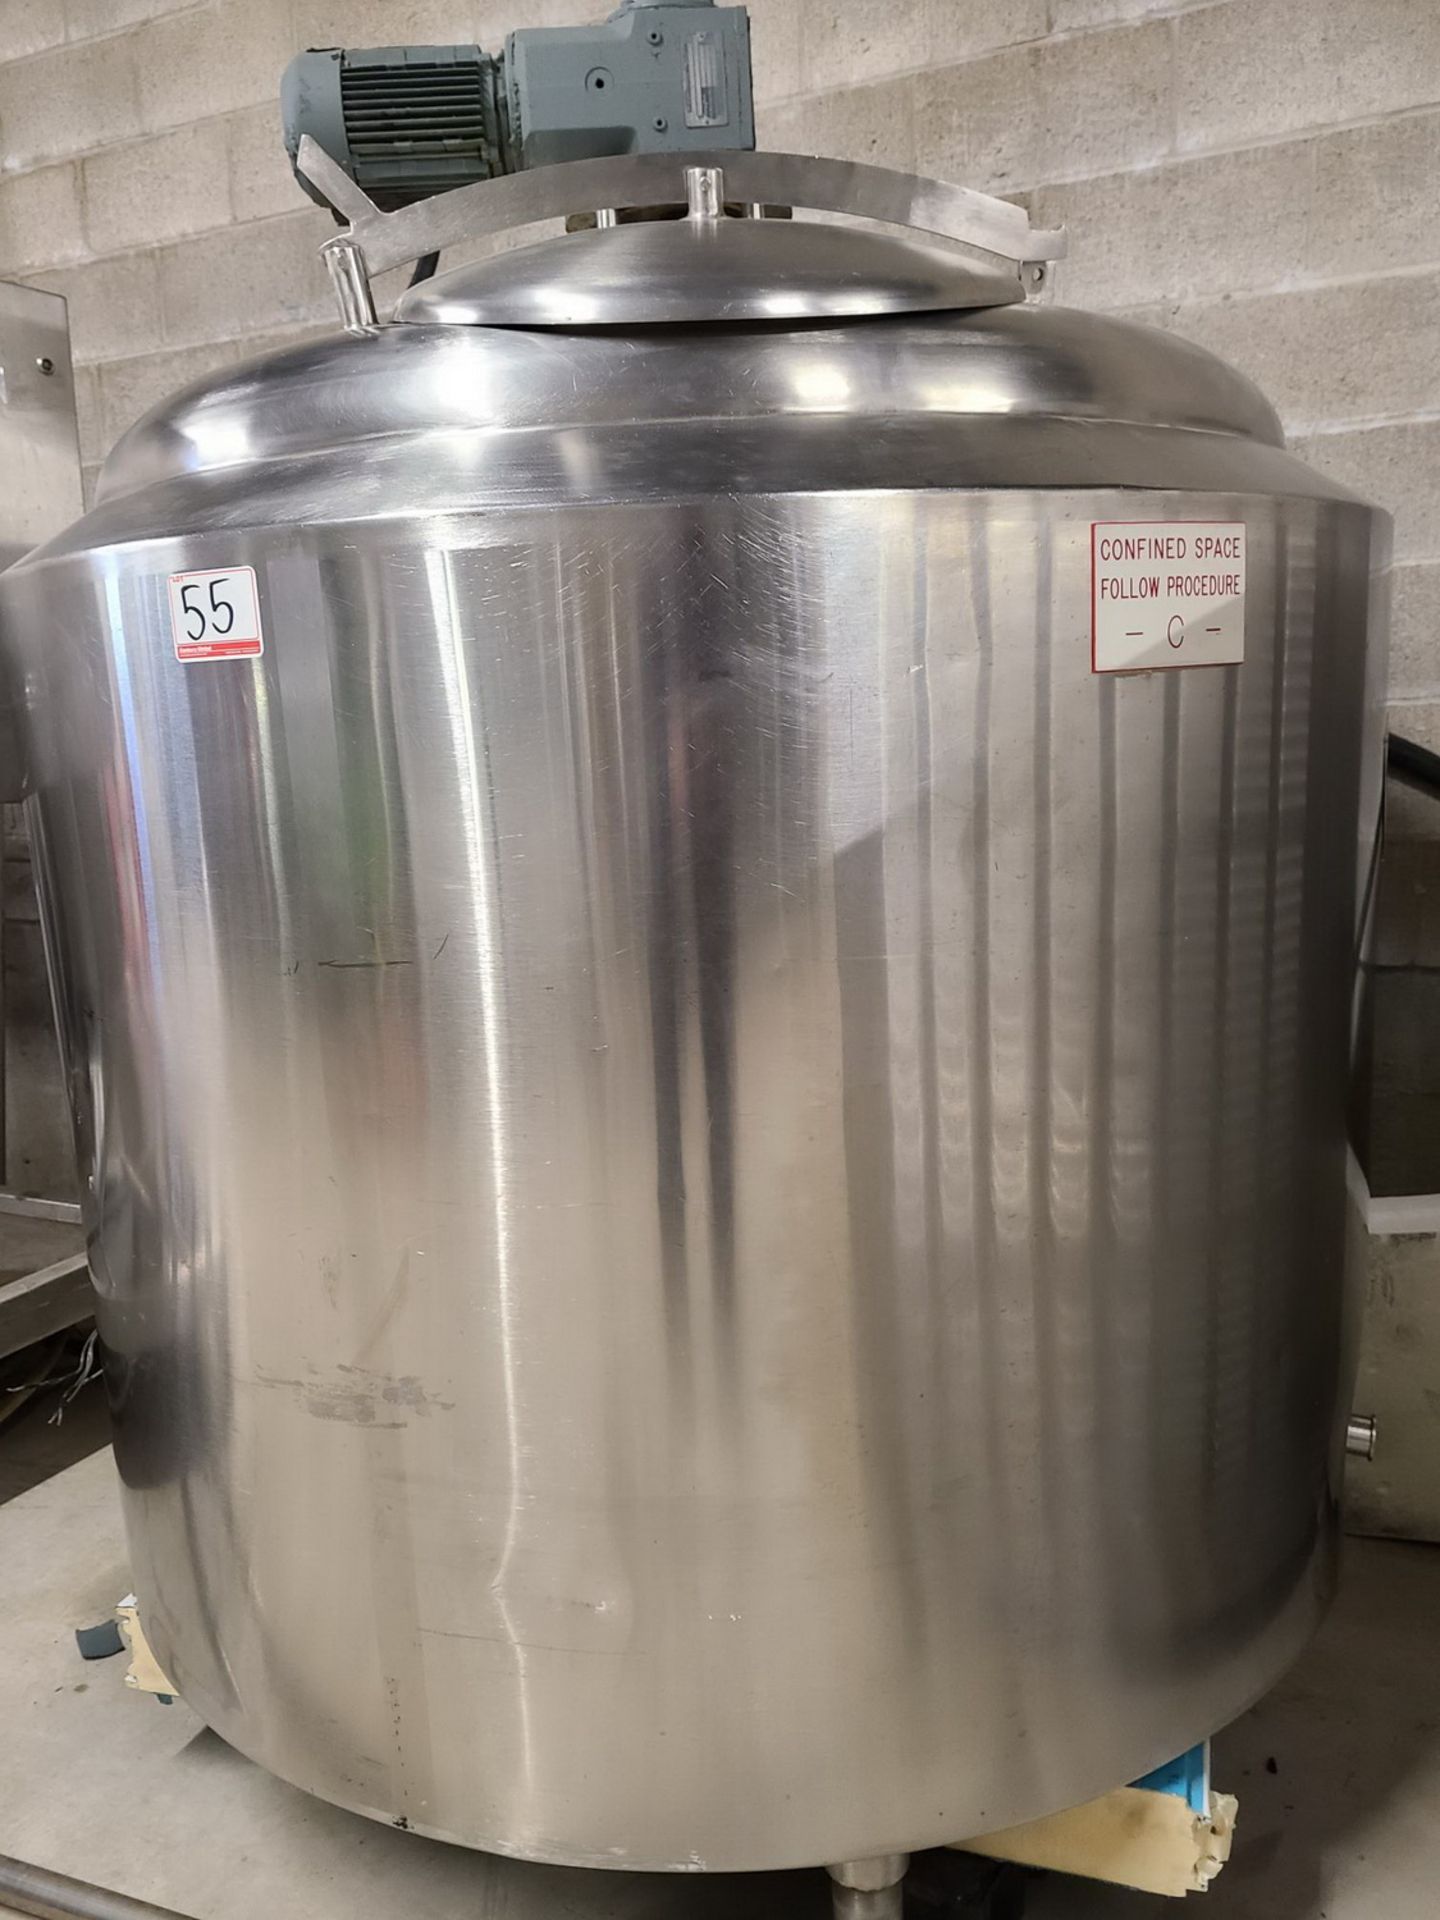 ST REGIS JACKETED STAINLESS STEEL MIXING TANK (INTERIOR APPROX. 54" X 43"D) W/ BOTTOM DISCHARGE, S/N